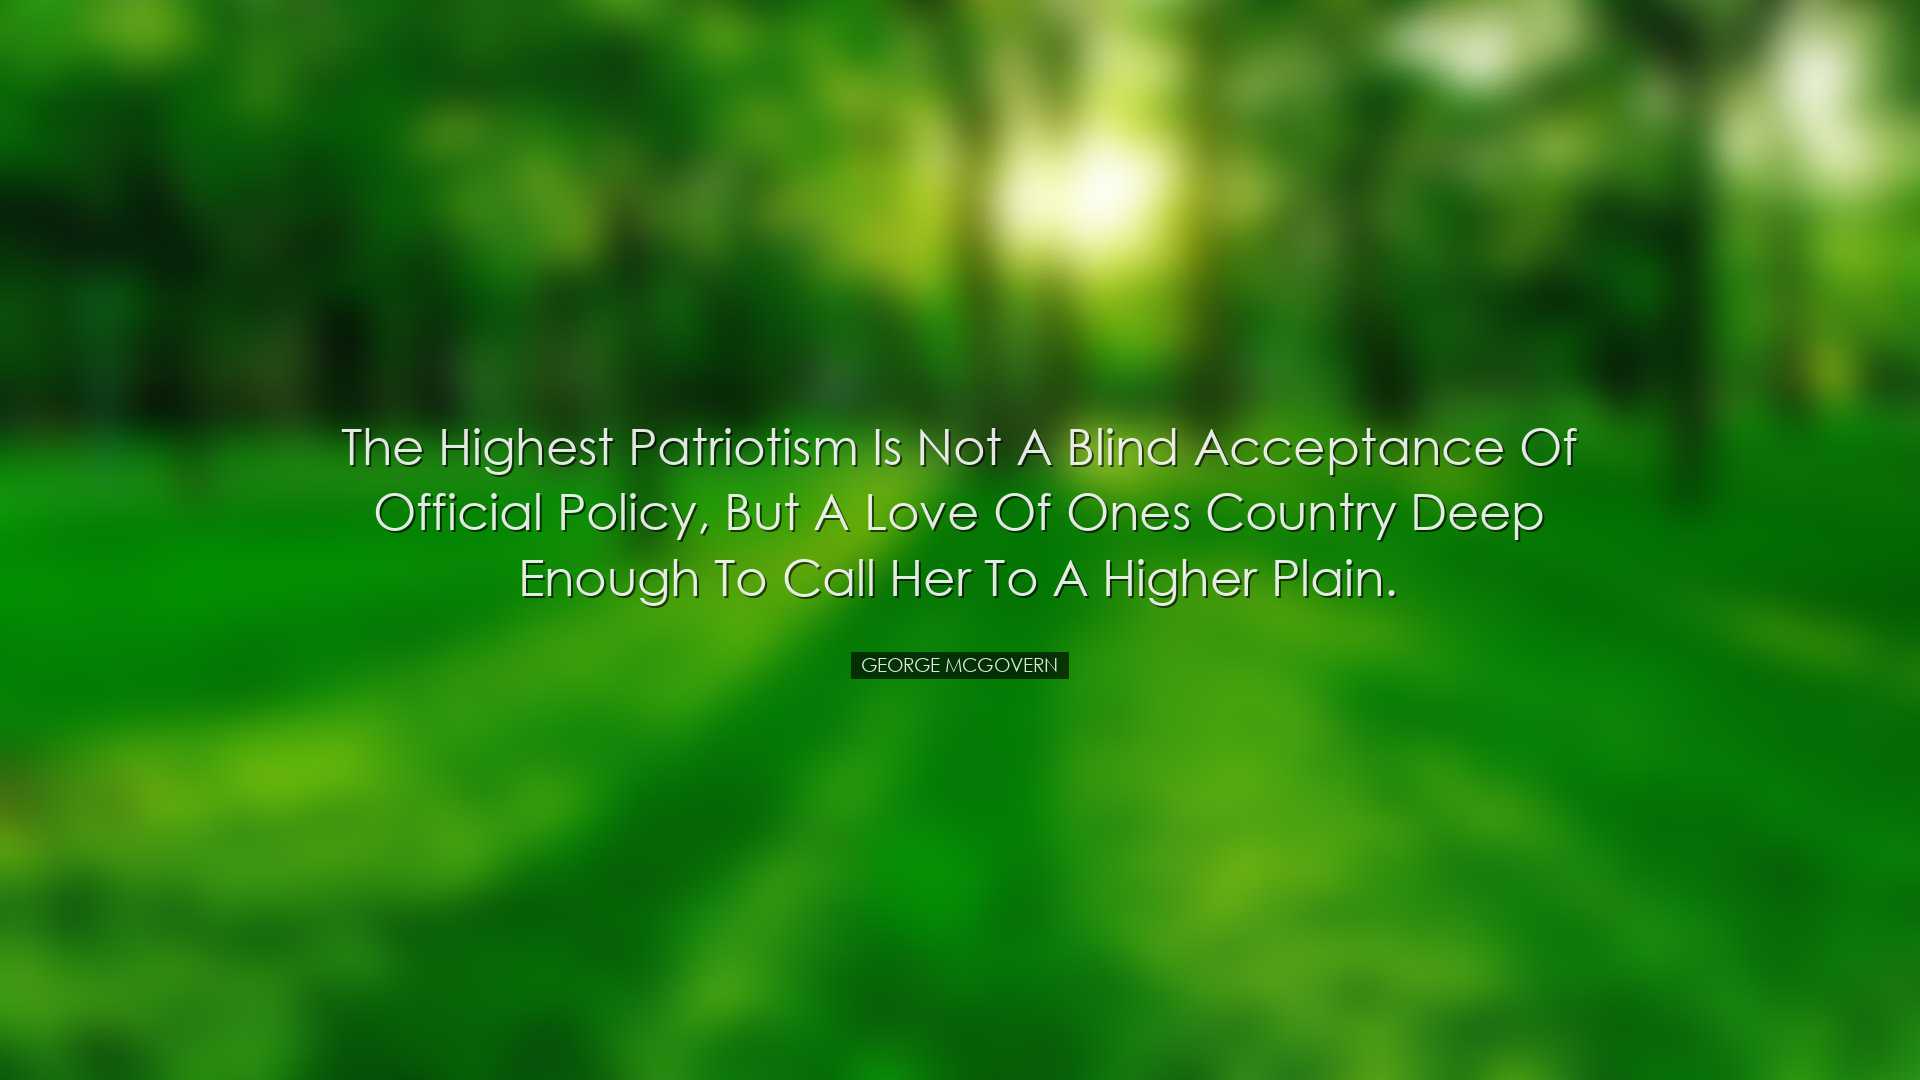 The highest patriotism is not a blind acceptance of official polic